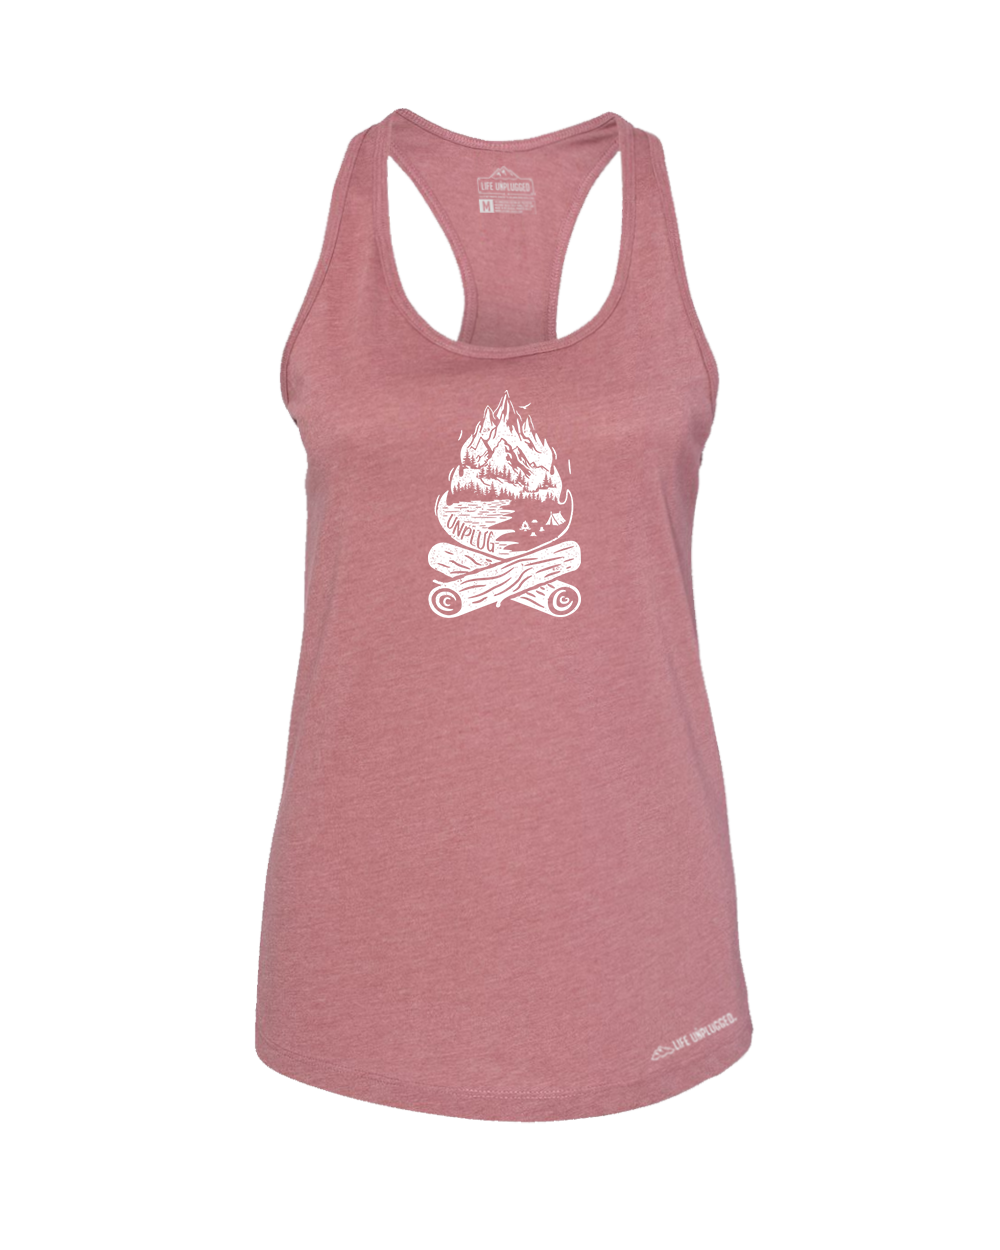 Campfire Mountain scene Premium Women's Relaxed Fit Racerback Tank Top - Life Unplugged